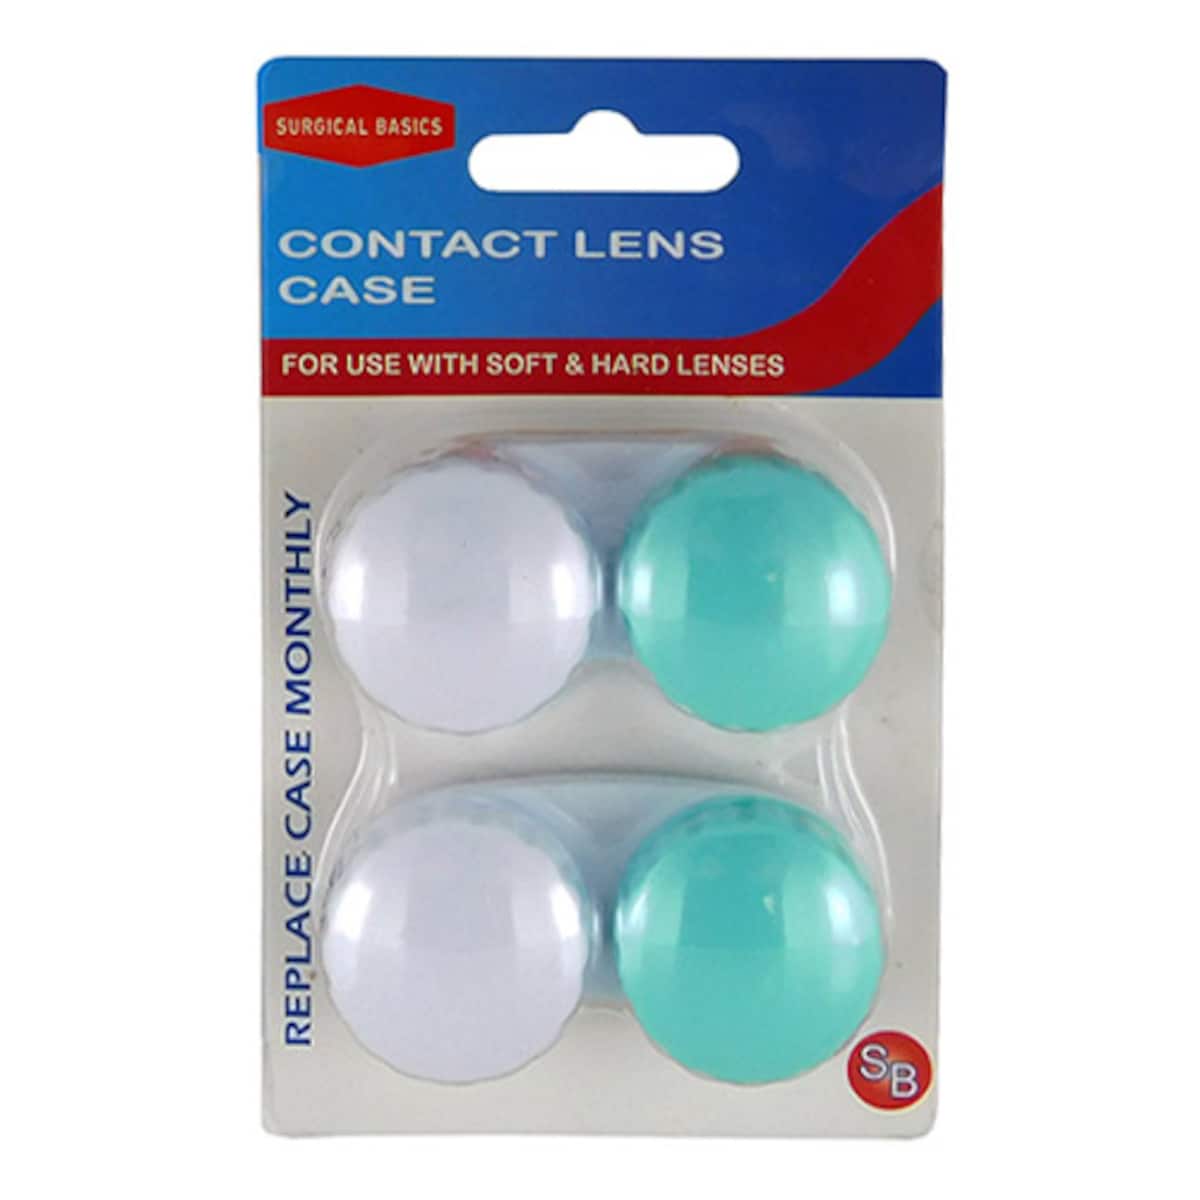 Surgical Basics Contact Lens Case 2 Cases